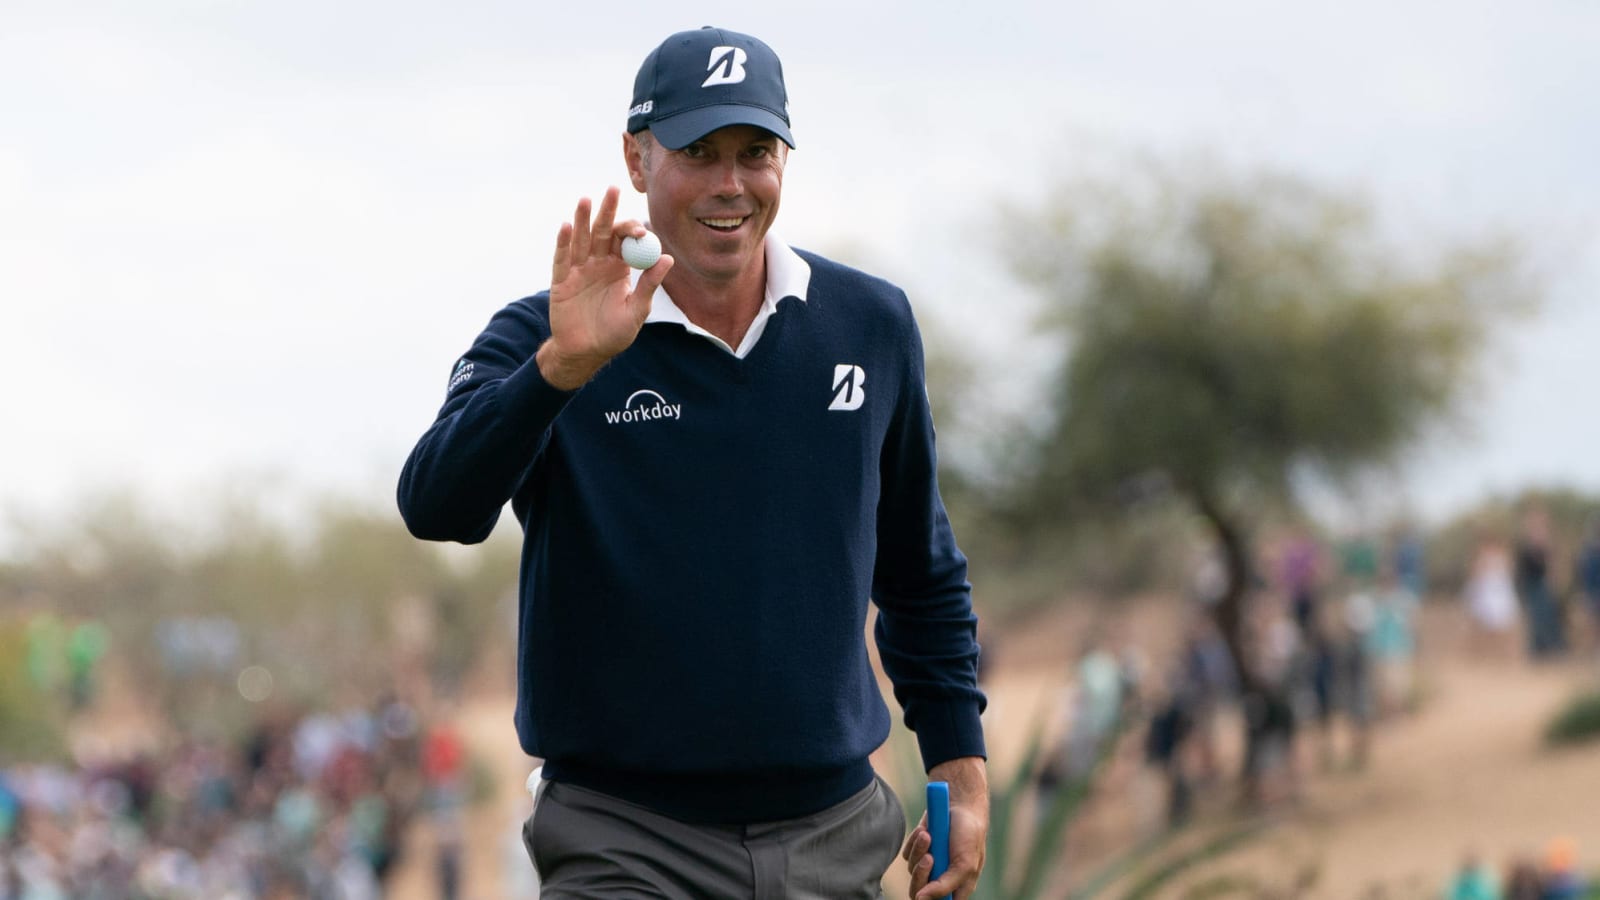 Ex-PGA Tour caddie: Matt Kuchar ‘is the biggest phony out there’